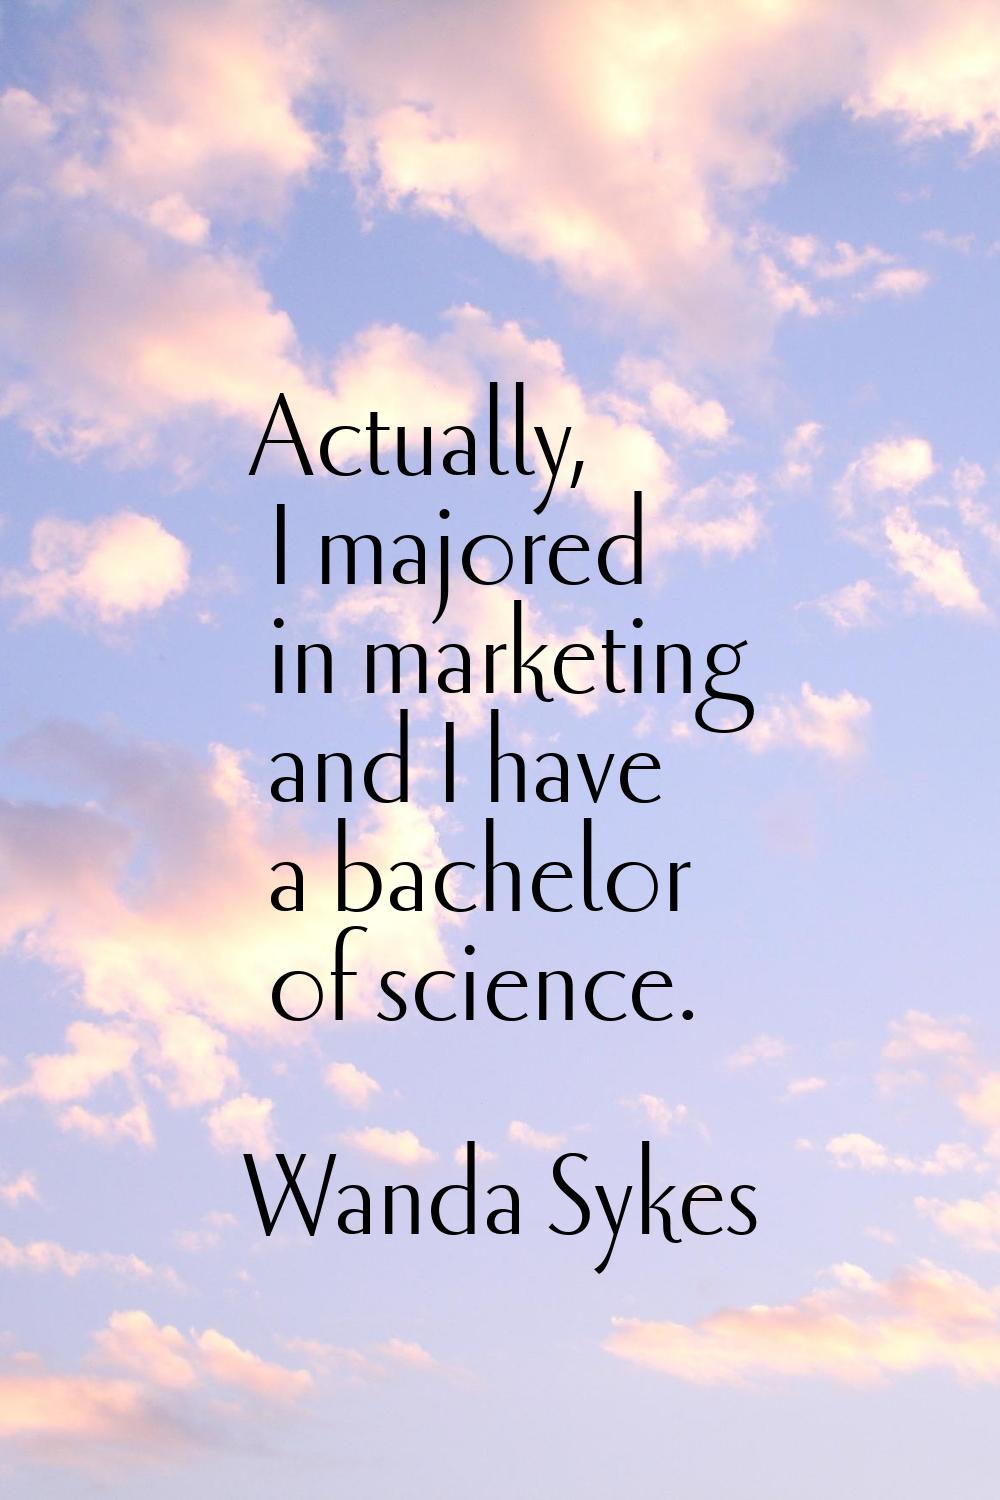 Actually, I majored in marketing and I have a bachelor of science.